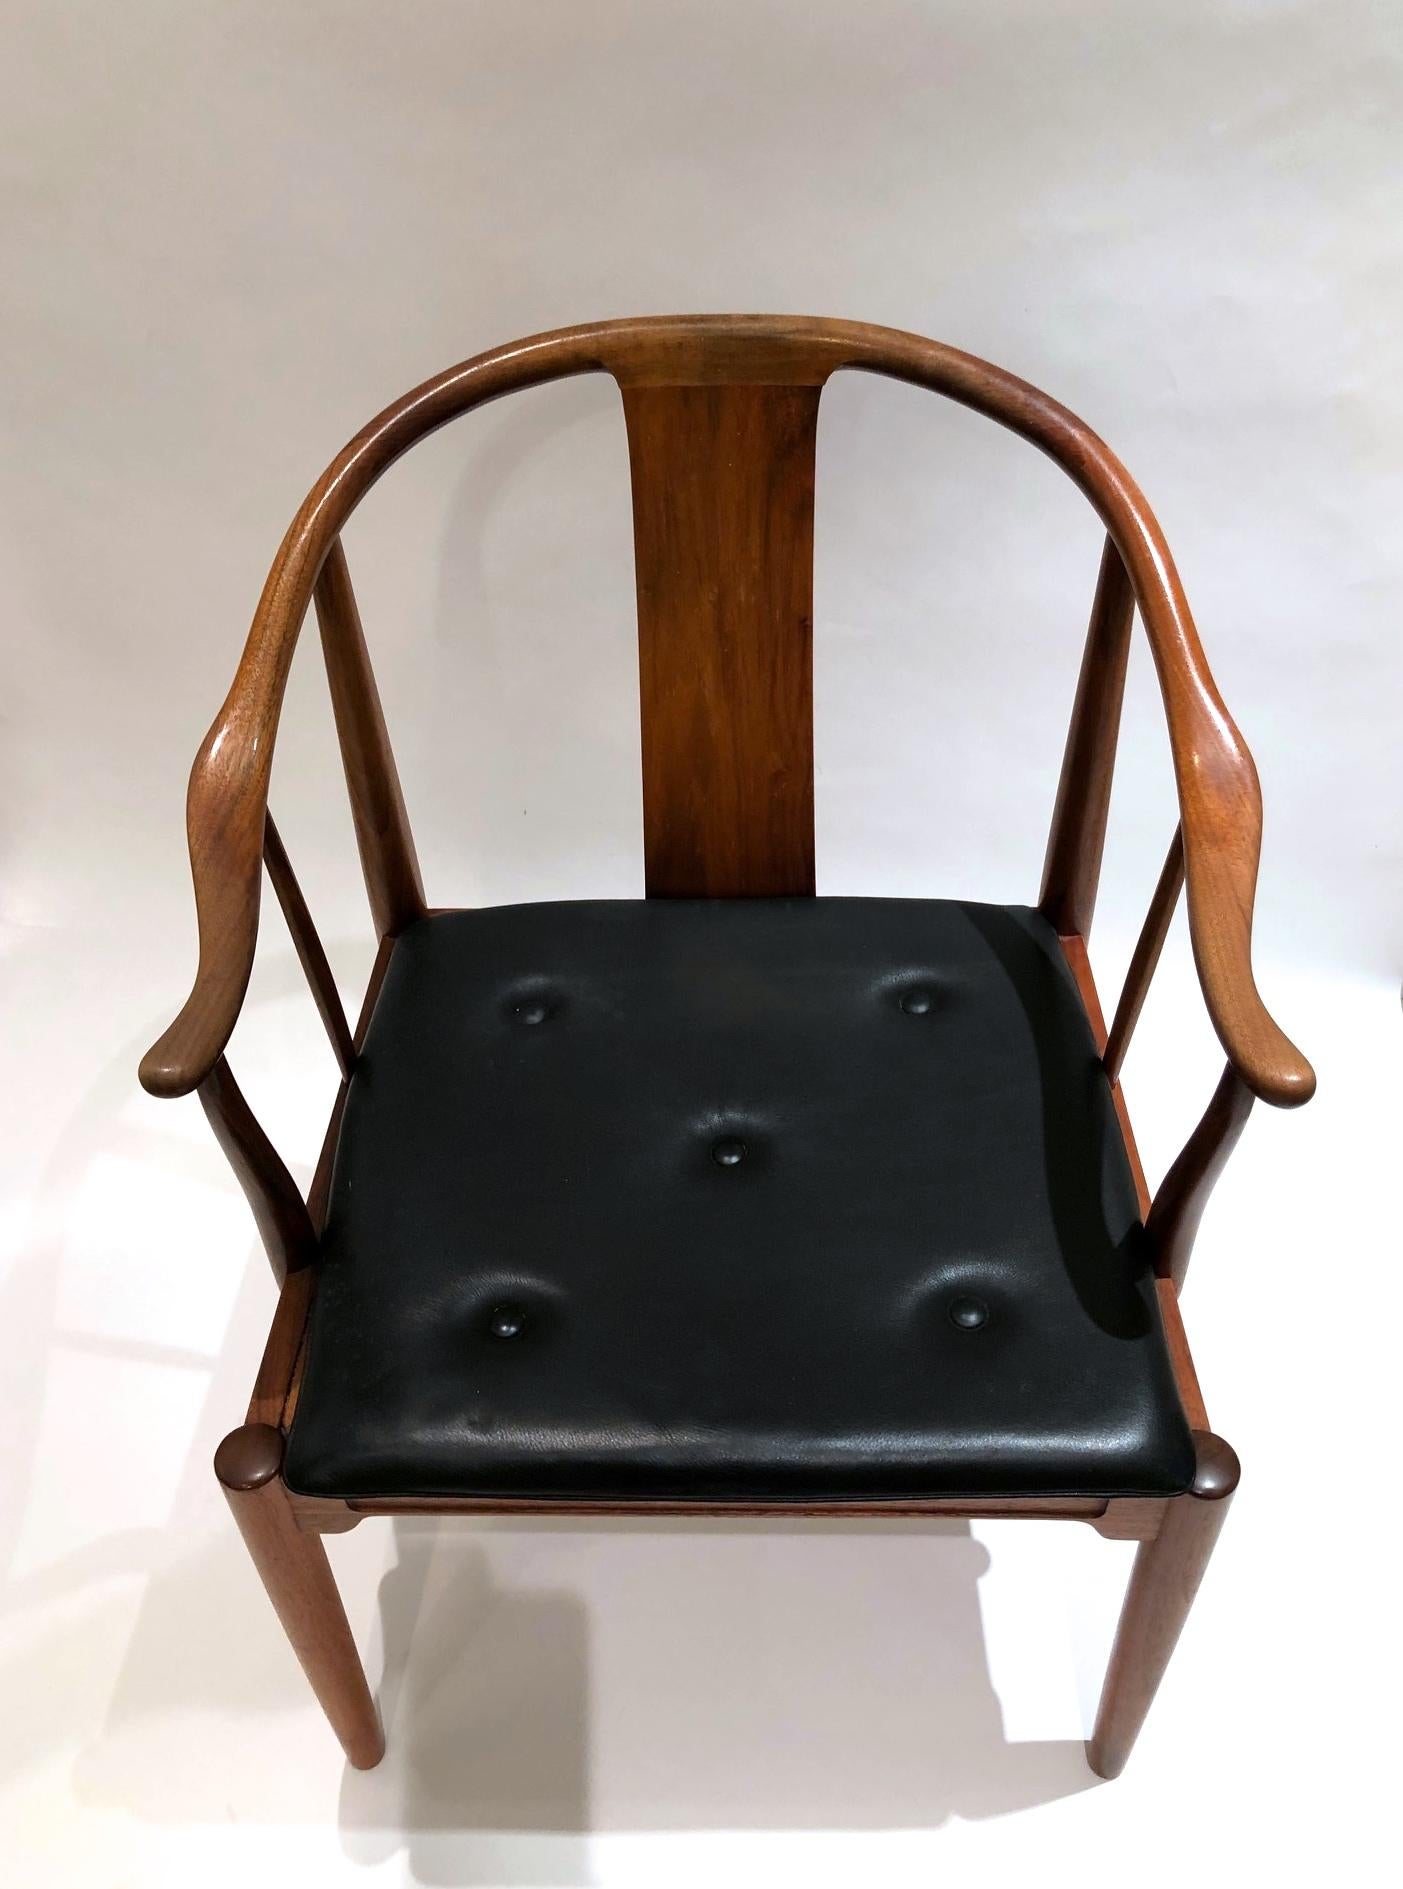 Hans J. Wegner, a 1977 Limited Edition Walnut Armchair “China Chair” For Sale 2